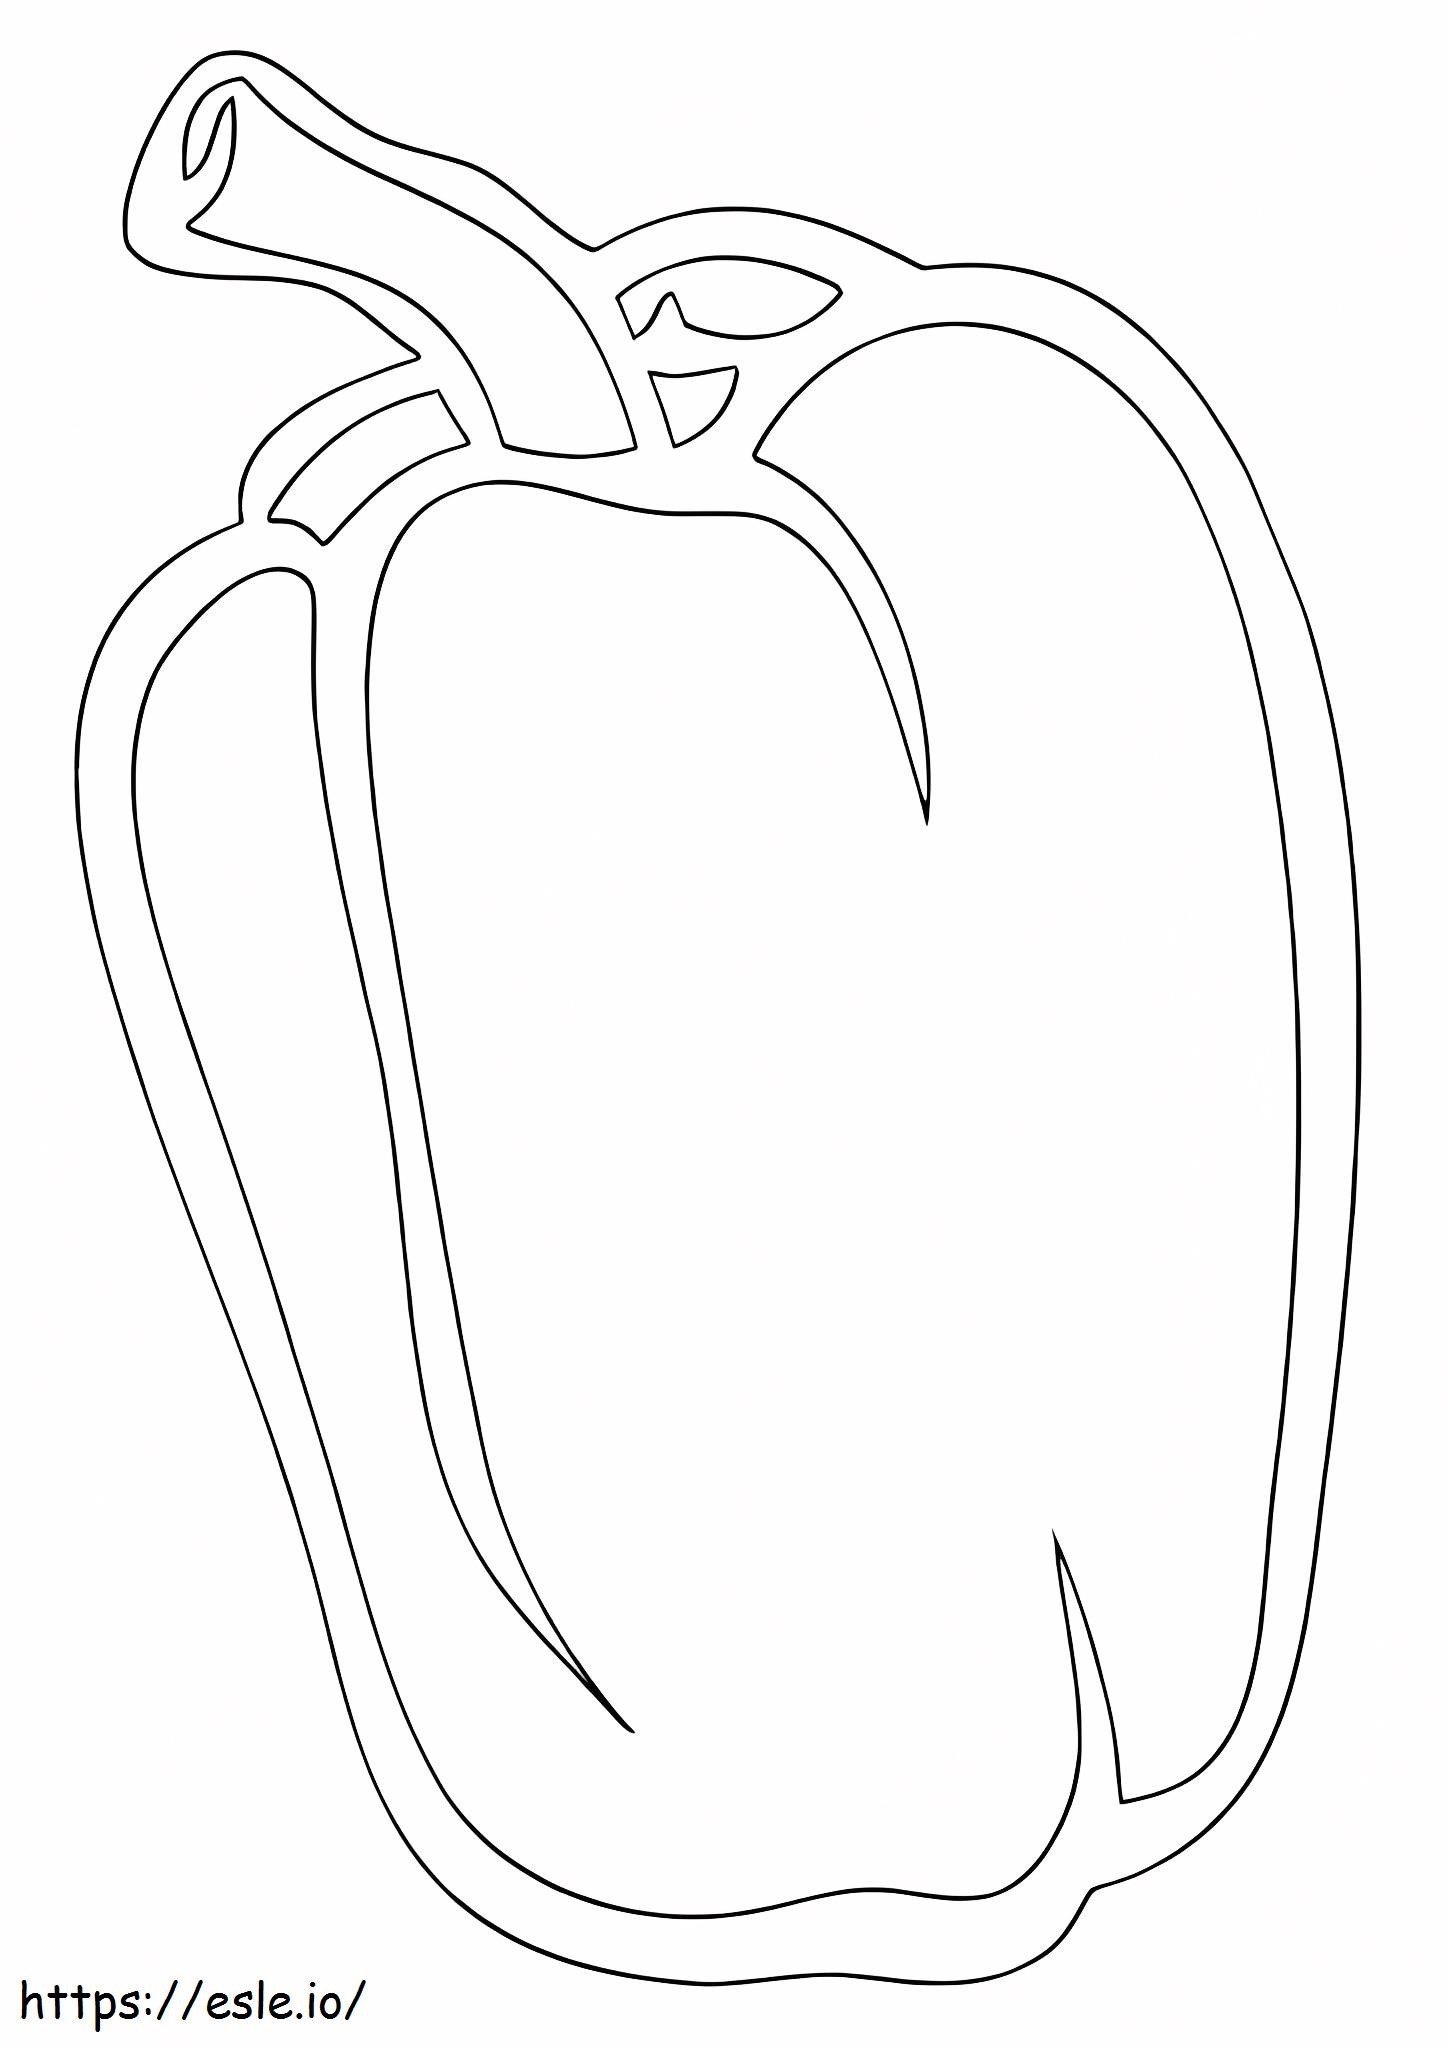 Great Chili Pepper coloring page